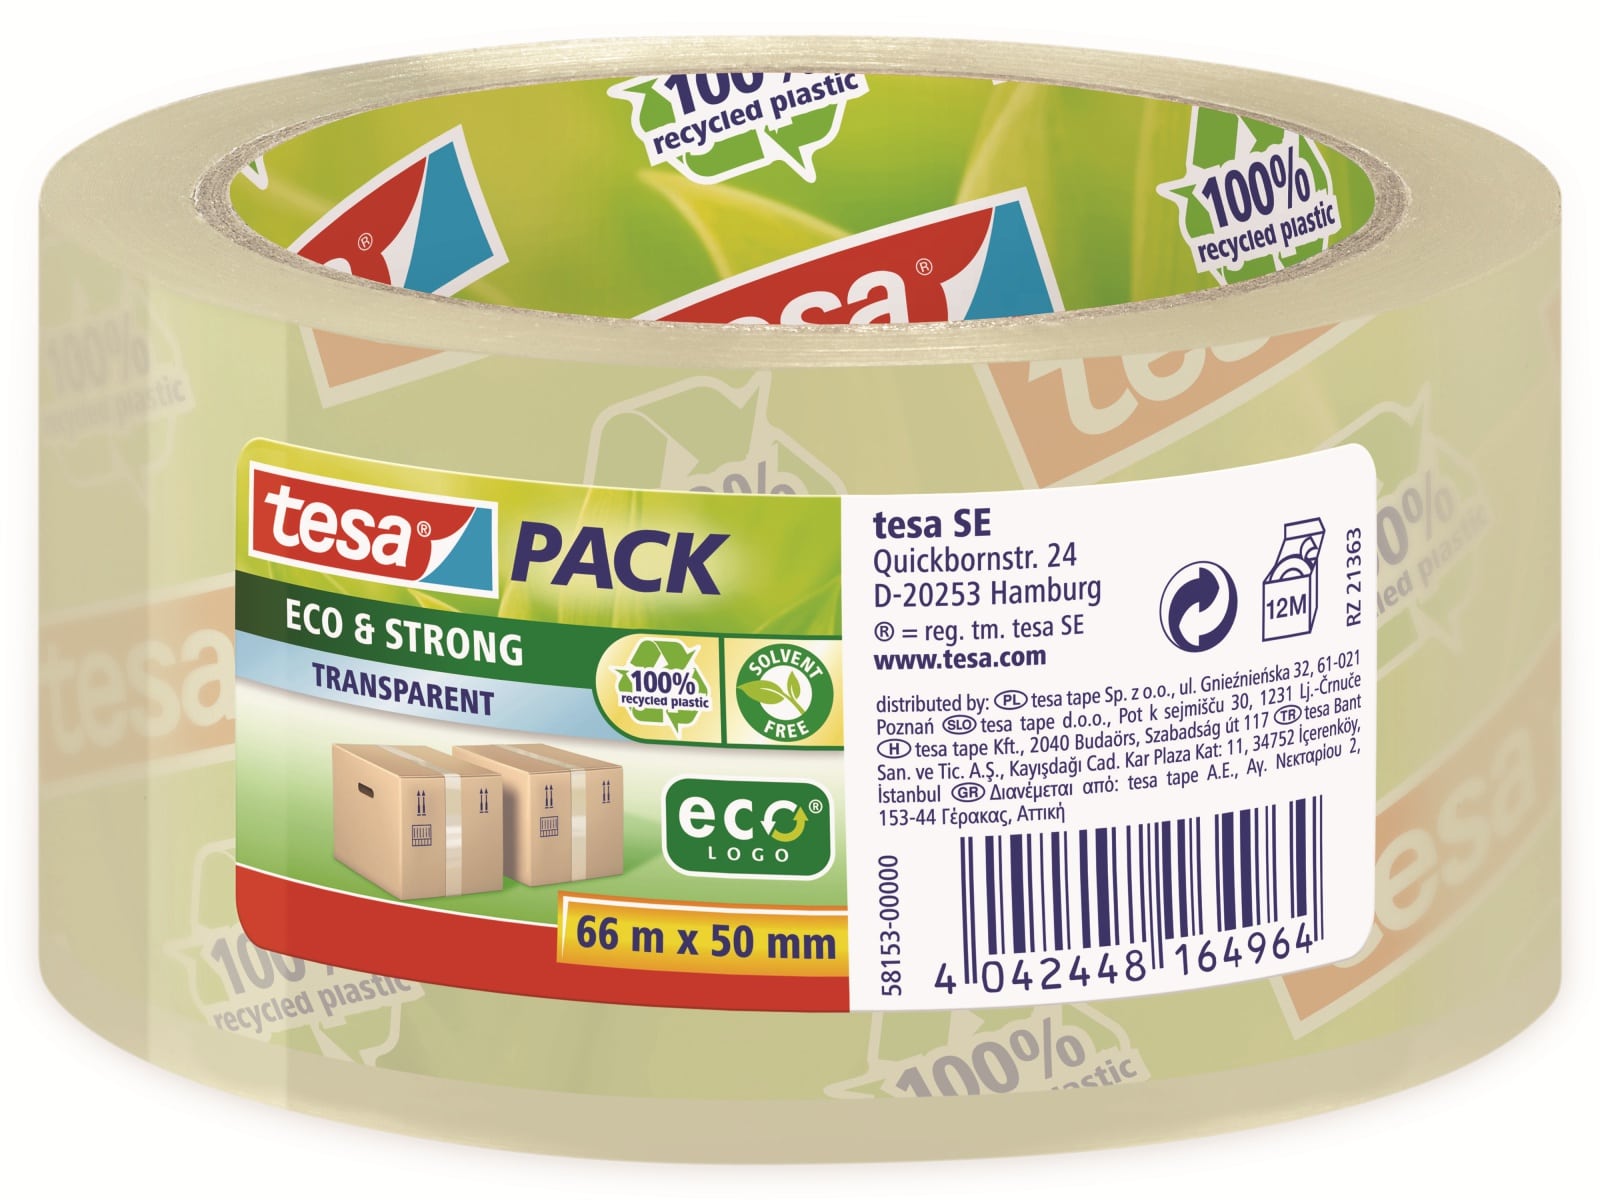 TESA pack® Eco & Strong, transparent, 66m:50mm, 58153-00000-00